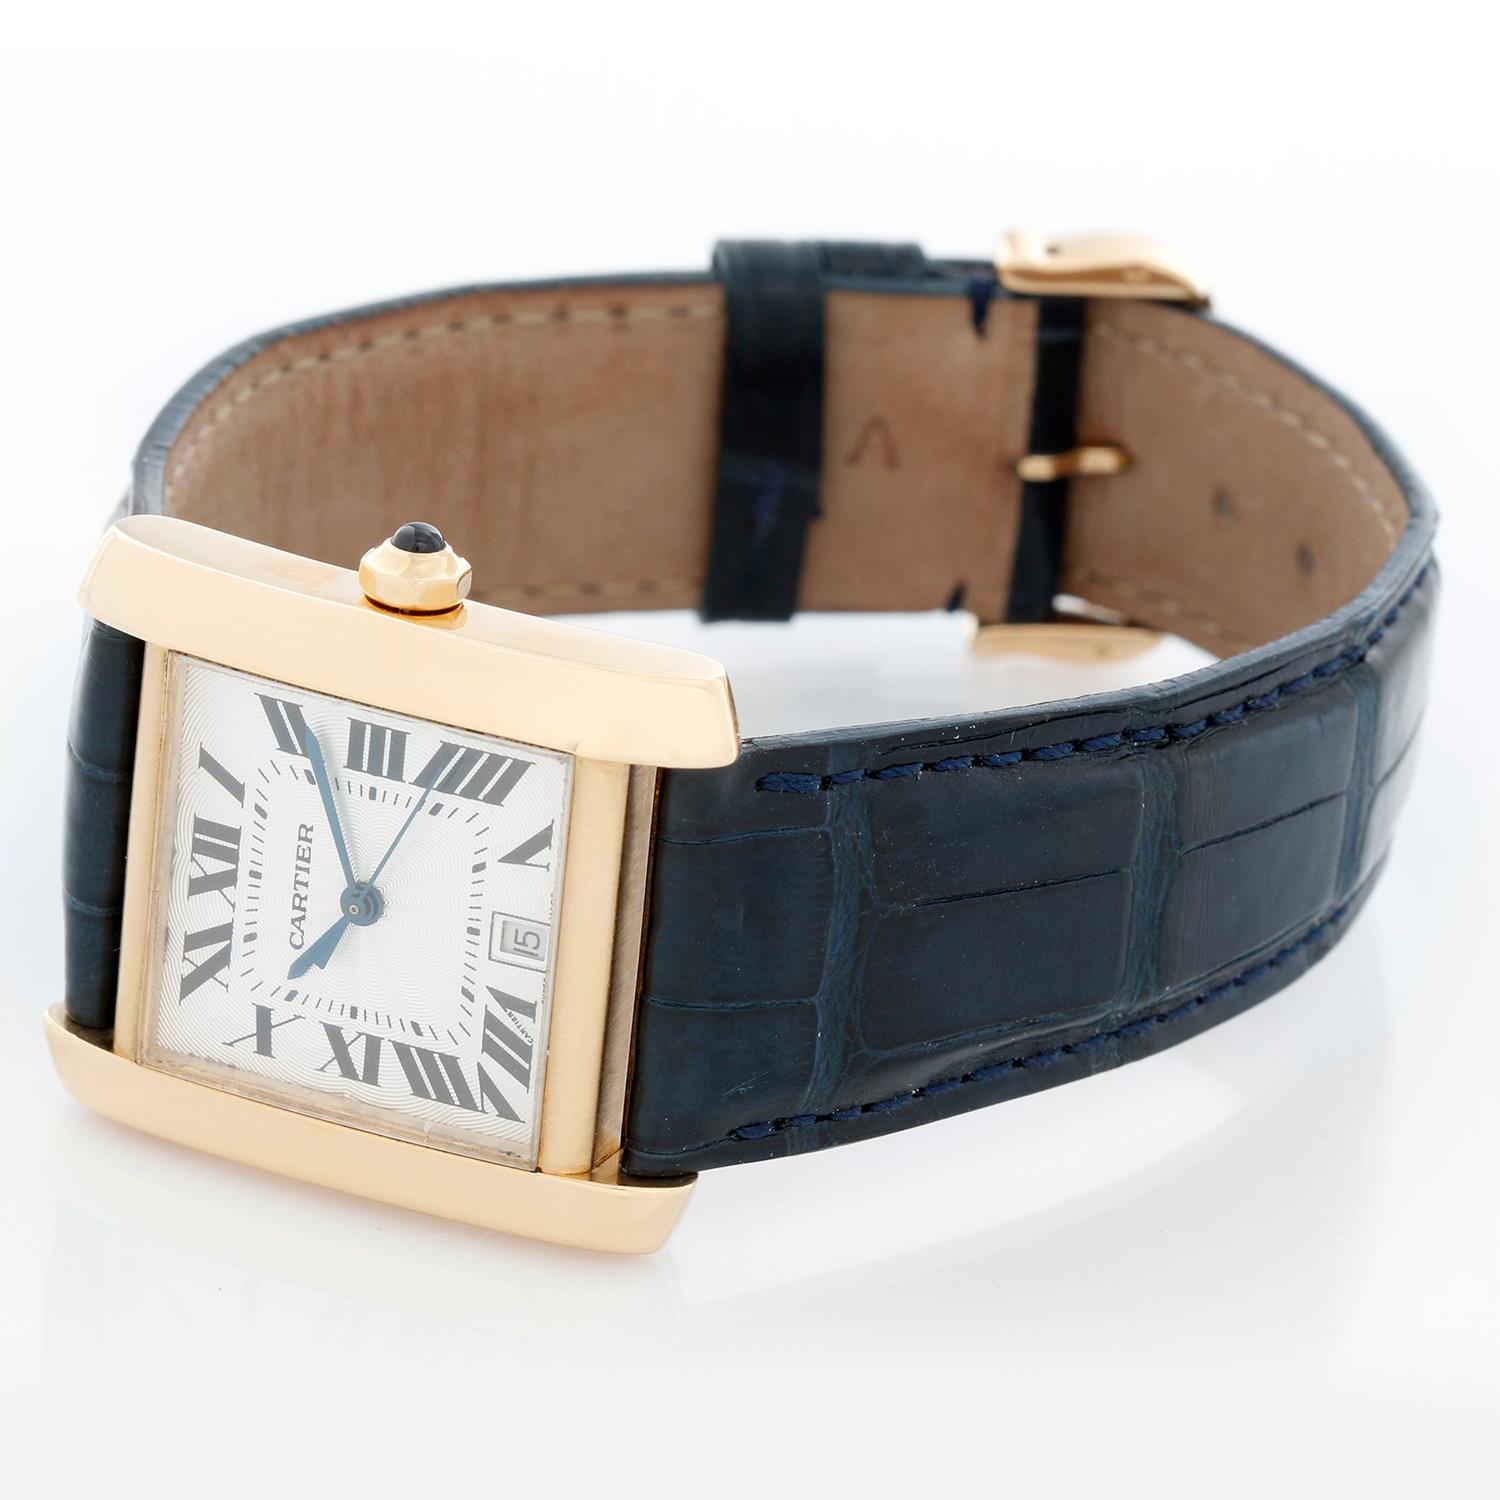 Cartier Tank Francaise 18k Yellow Gold Men's Watch W5000156 - Automatic winding; date at 6 o'clock. 18k yellow gold case (28mm x 31mm). Silver guilloche dial with black Roman numerals. Blue strap band with 18k yellow gold Cartier buckle. Pre-owned